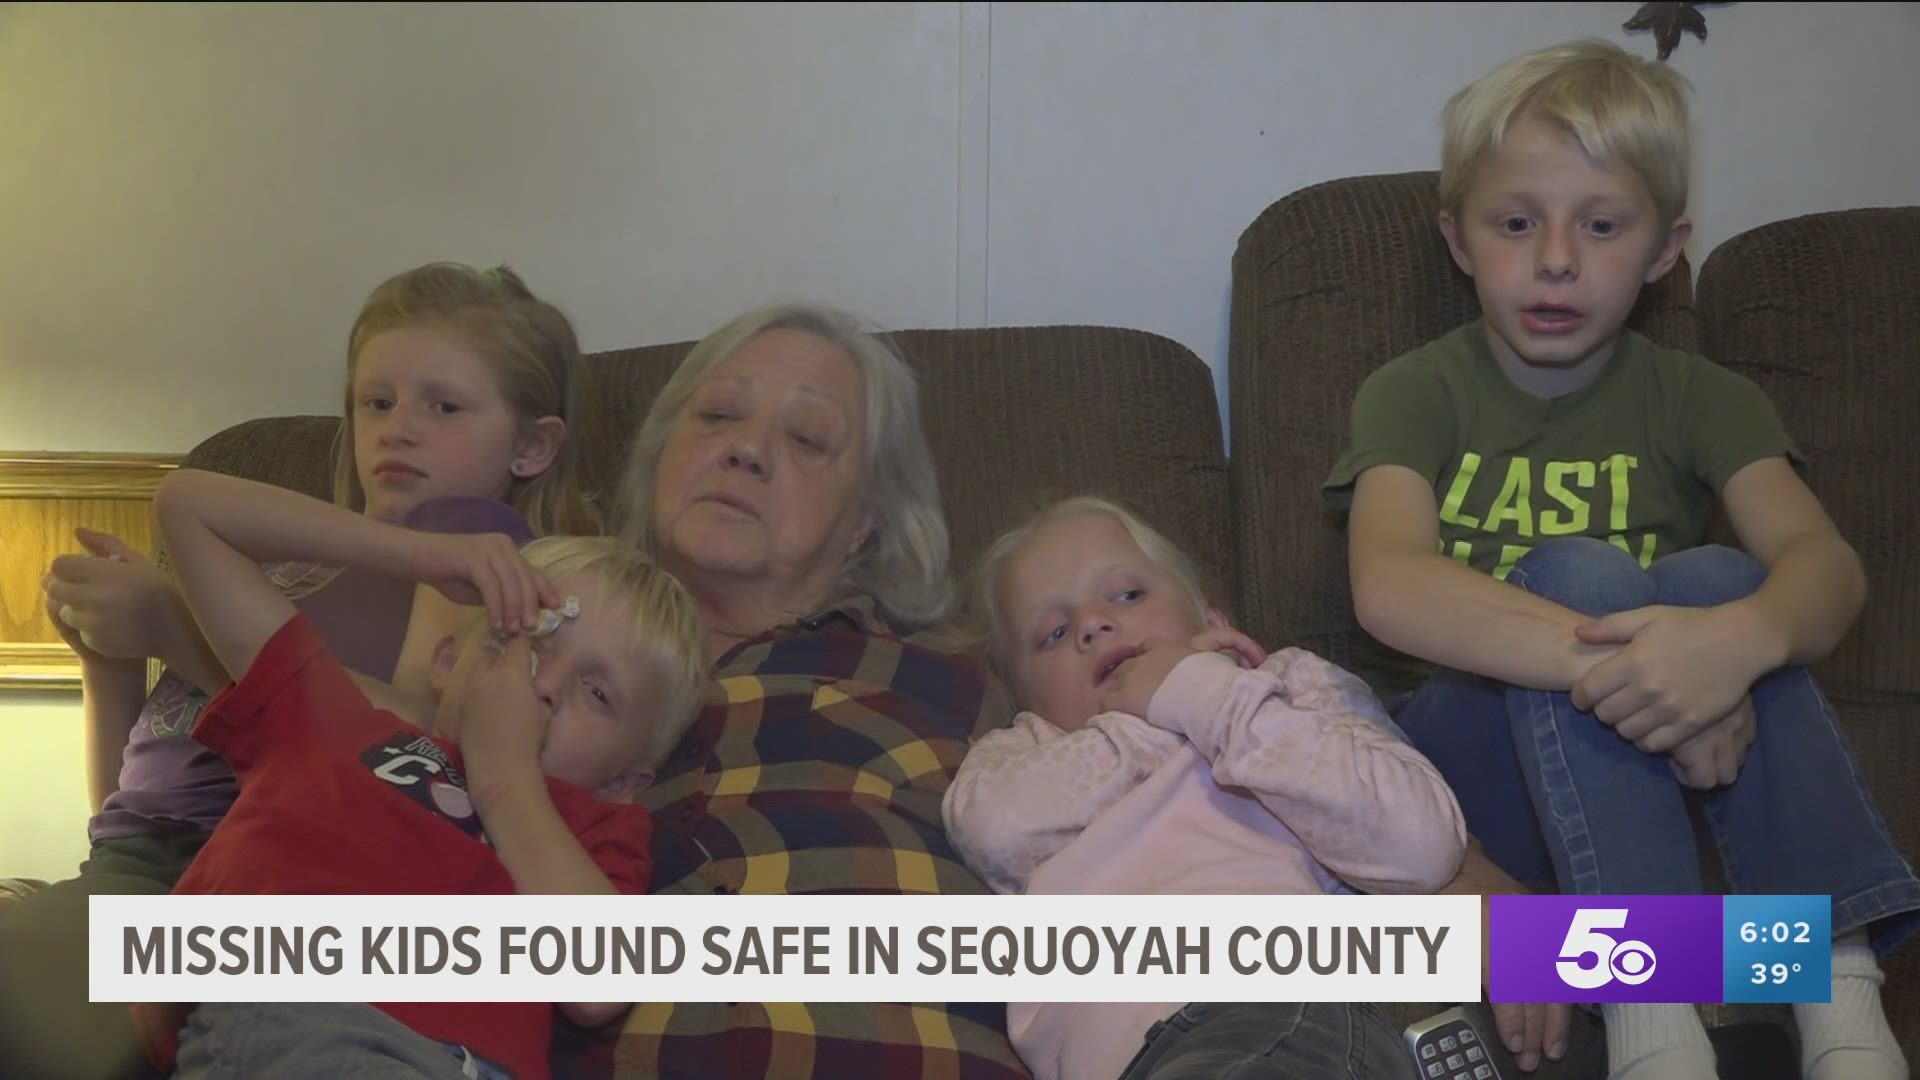 All four kids were found safe early on Wednesday morning around 1.3 miles from home below Tenkiller Dam. https://bit.ly/36zfILS